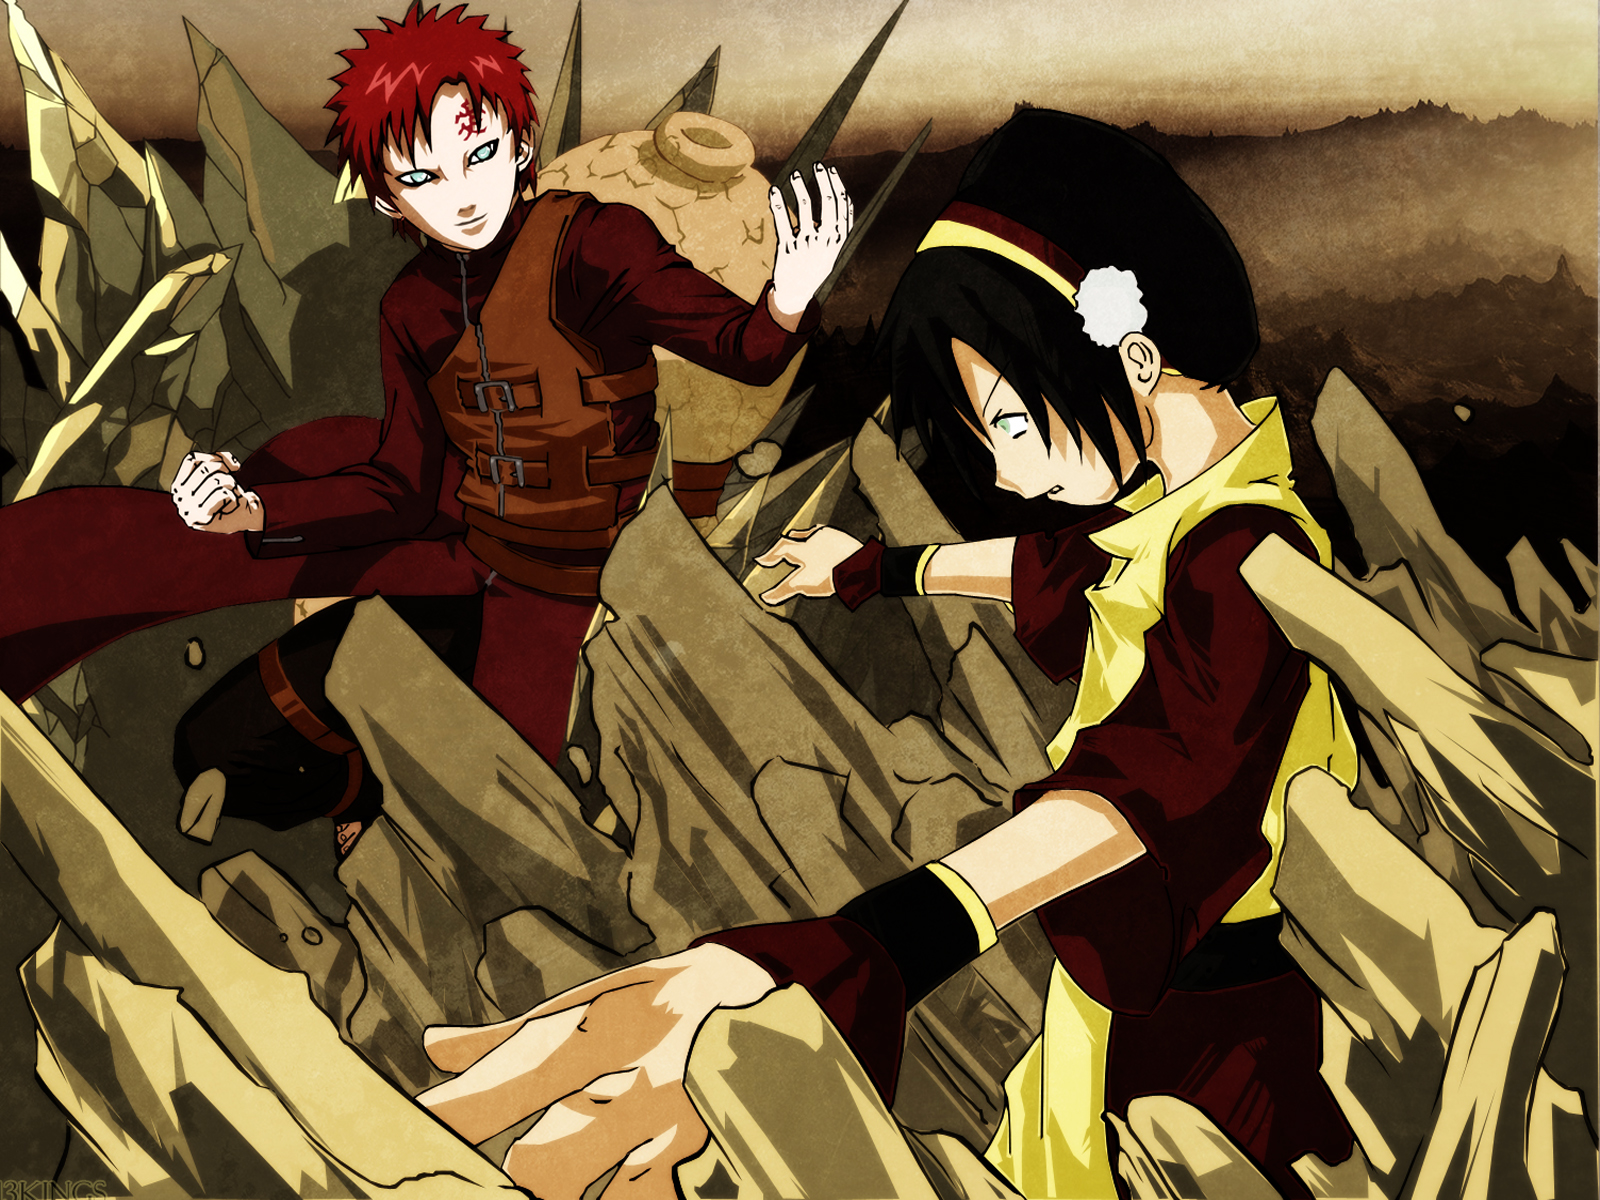 Toph Beifong and Gaara in intense battle, featuring Naruto and Avatar: The Last Airbender characters.